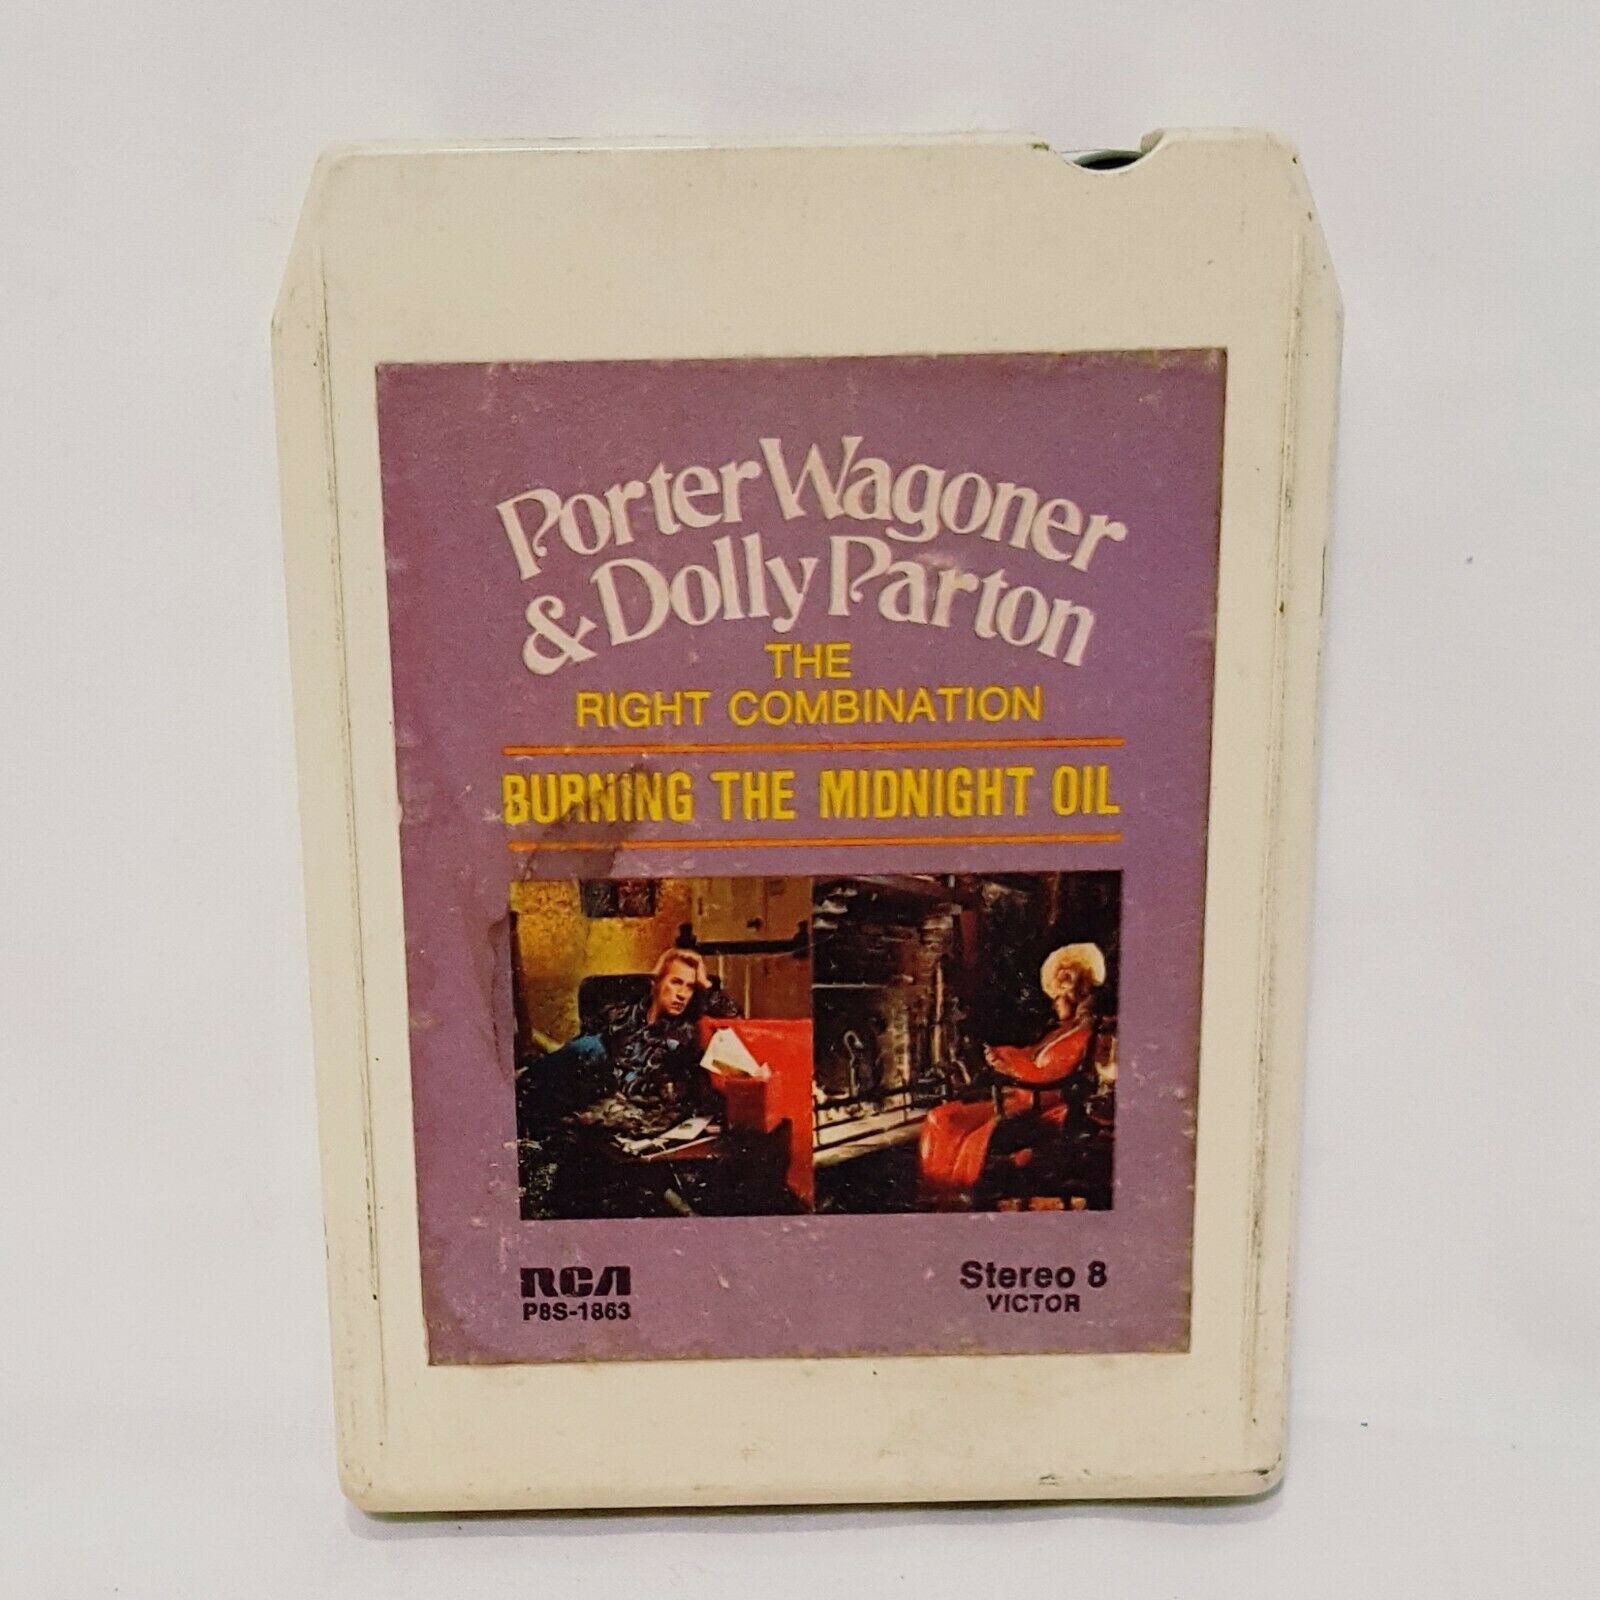 Primary image for Burning Midnight Oil Porter Wagoner Dolly Parton 8 track Cartridge RCA P8S 1863